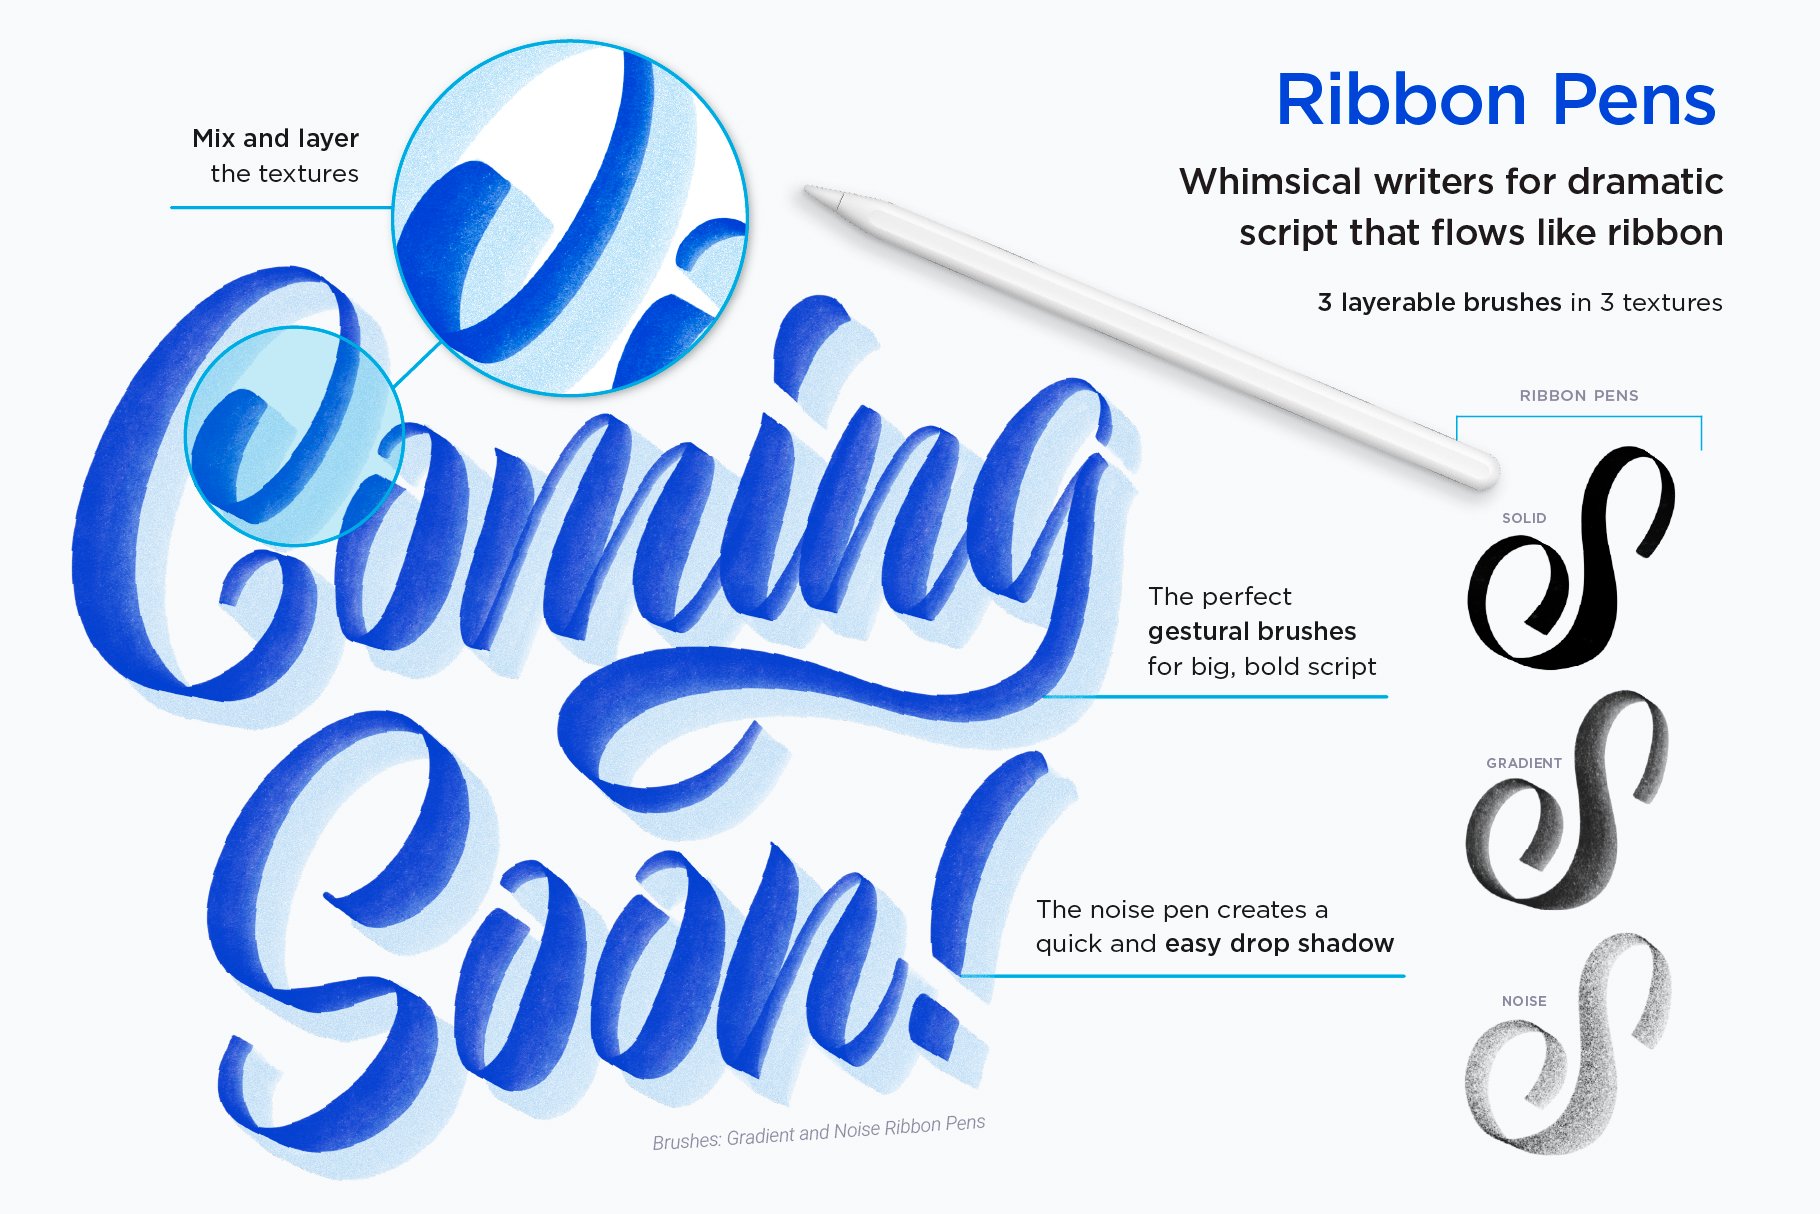 Introducing the BOLD Calligraphy Brush! — ECLetters